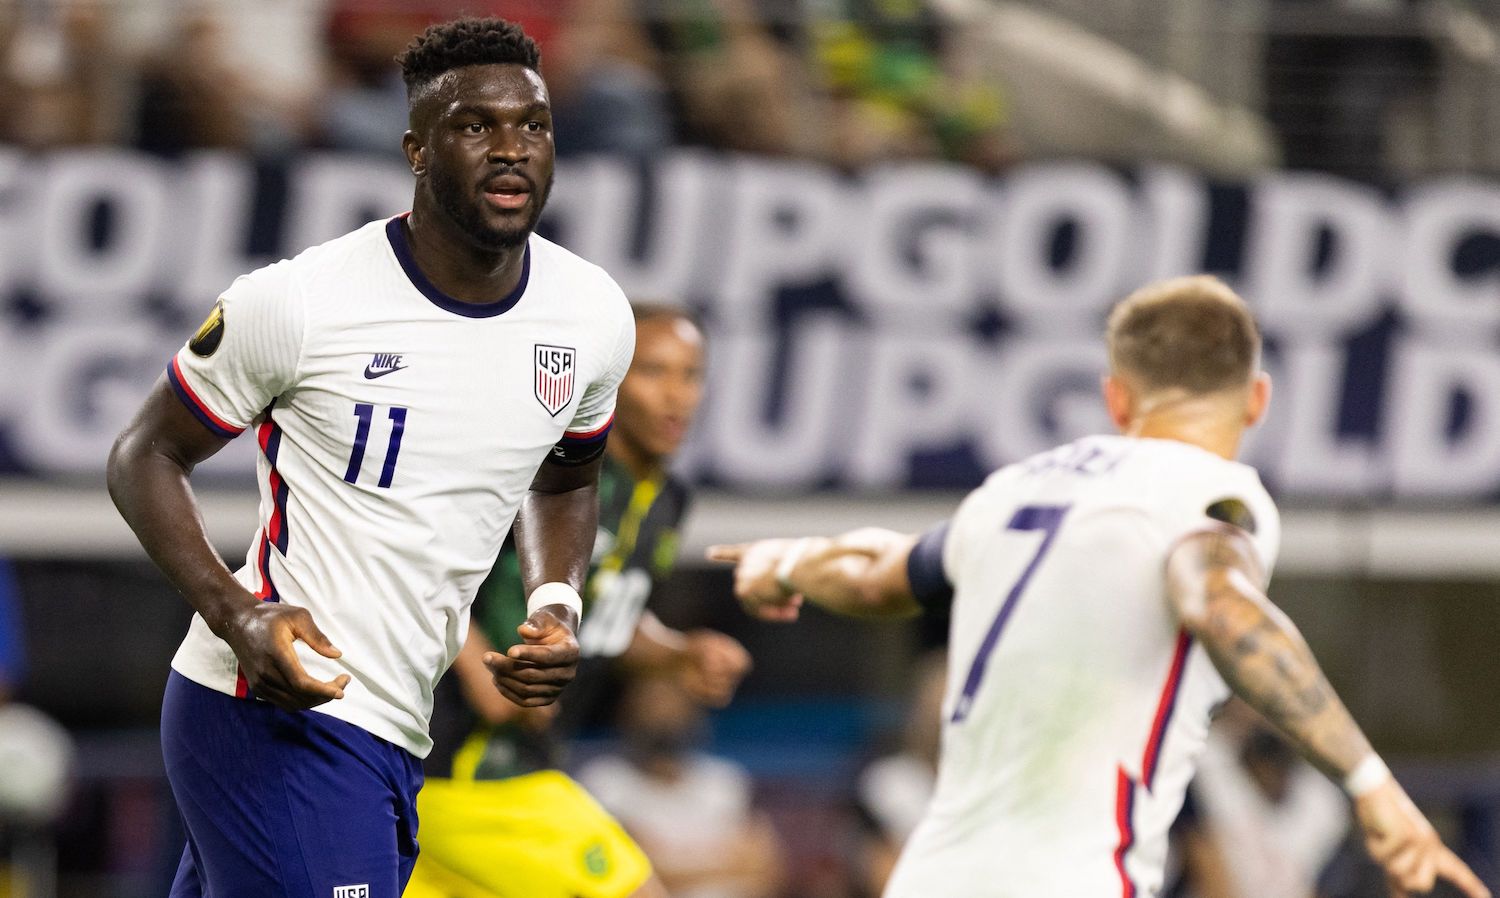 USA's forward Paul Arriola (R) points to forward Daryl Dike (L) after an opportunity during the Concacaf Gold Cup quarterfinal football match between USA and Jamaica at the AT&amp;T stadium in Arlington, Texas on July 25, 2021. (Photo by Andy JACOBSOHN / AFP) (Photo by ANDY JACOBSOHN/AFP via Getty Images)